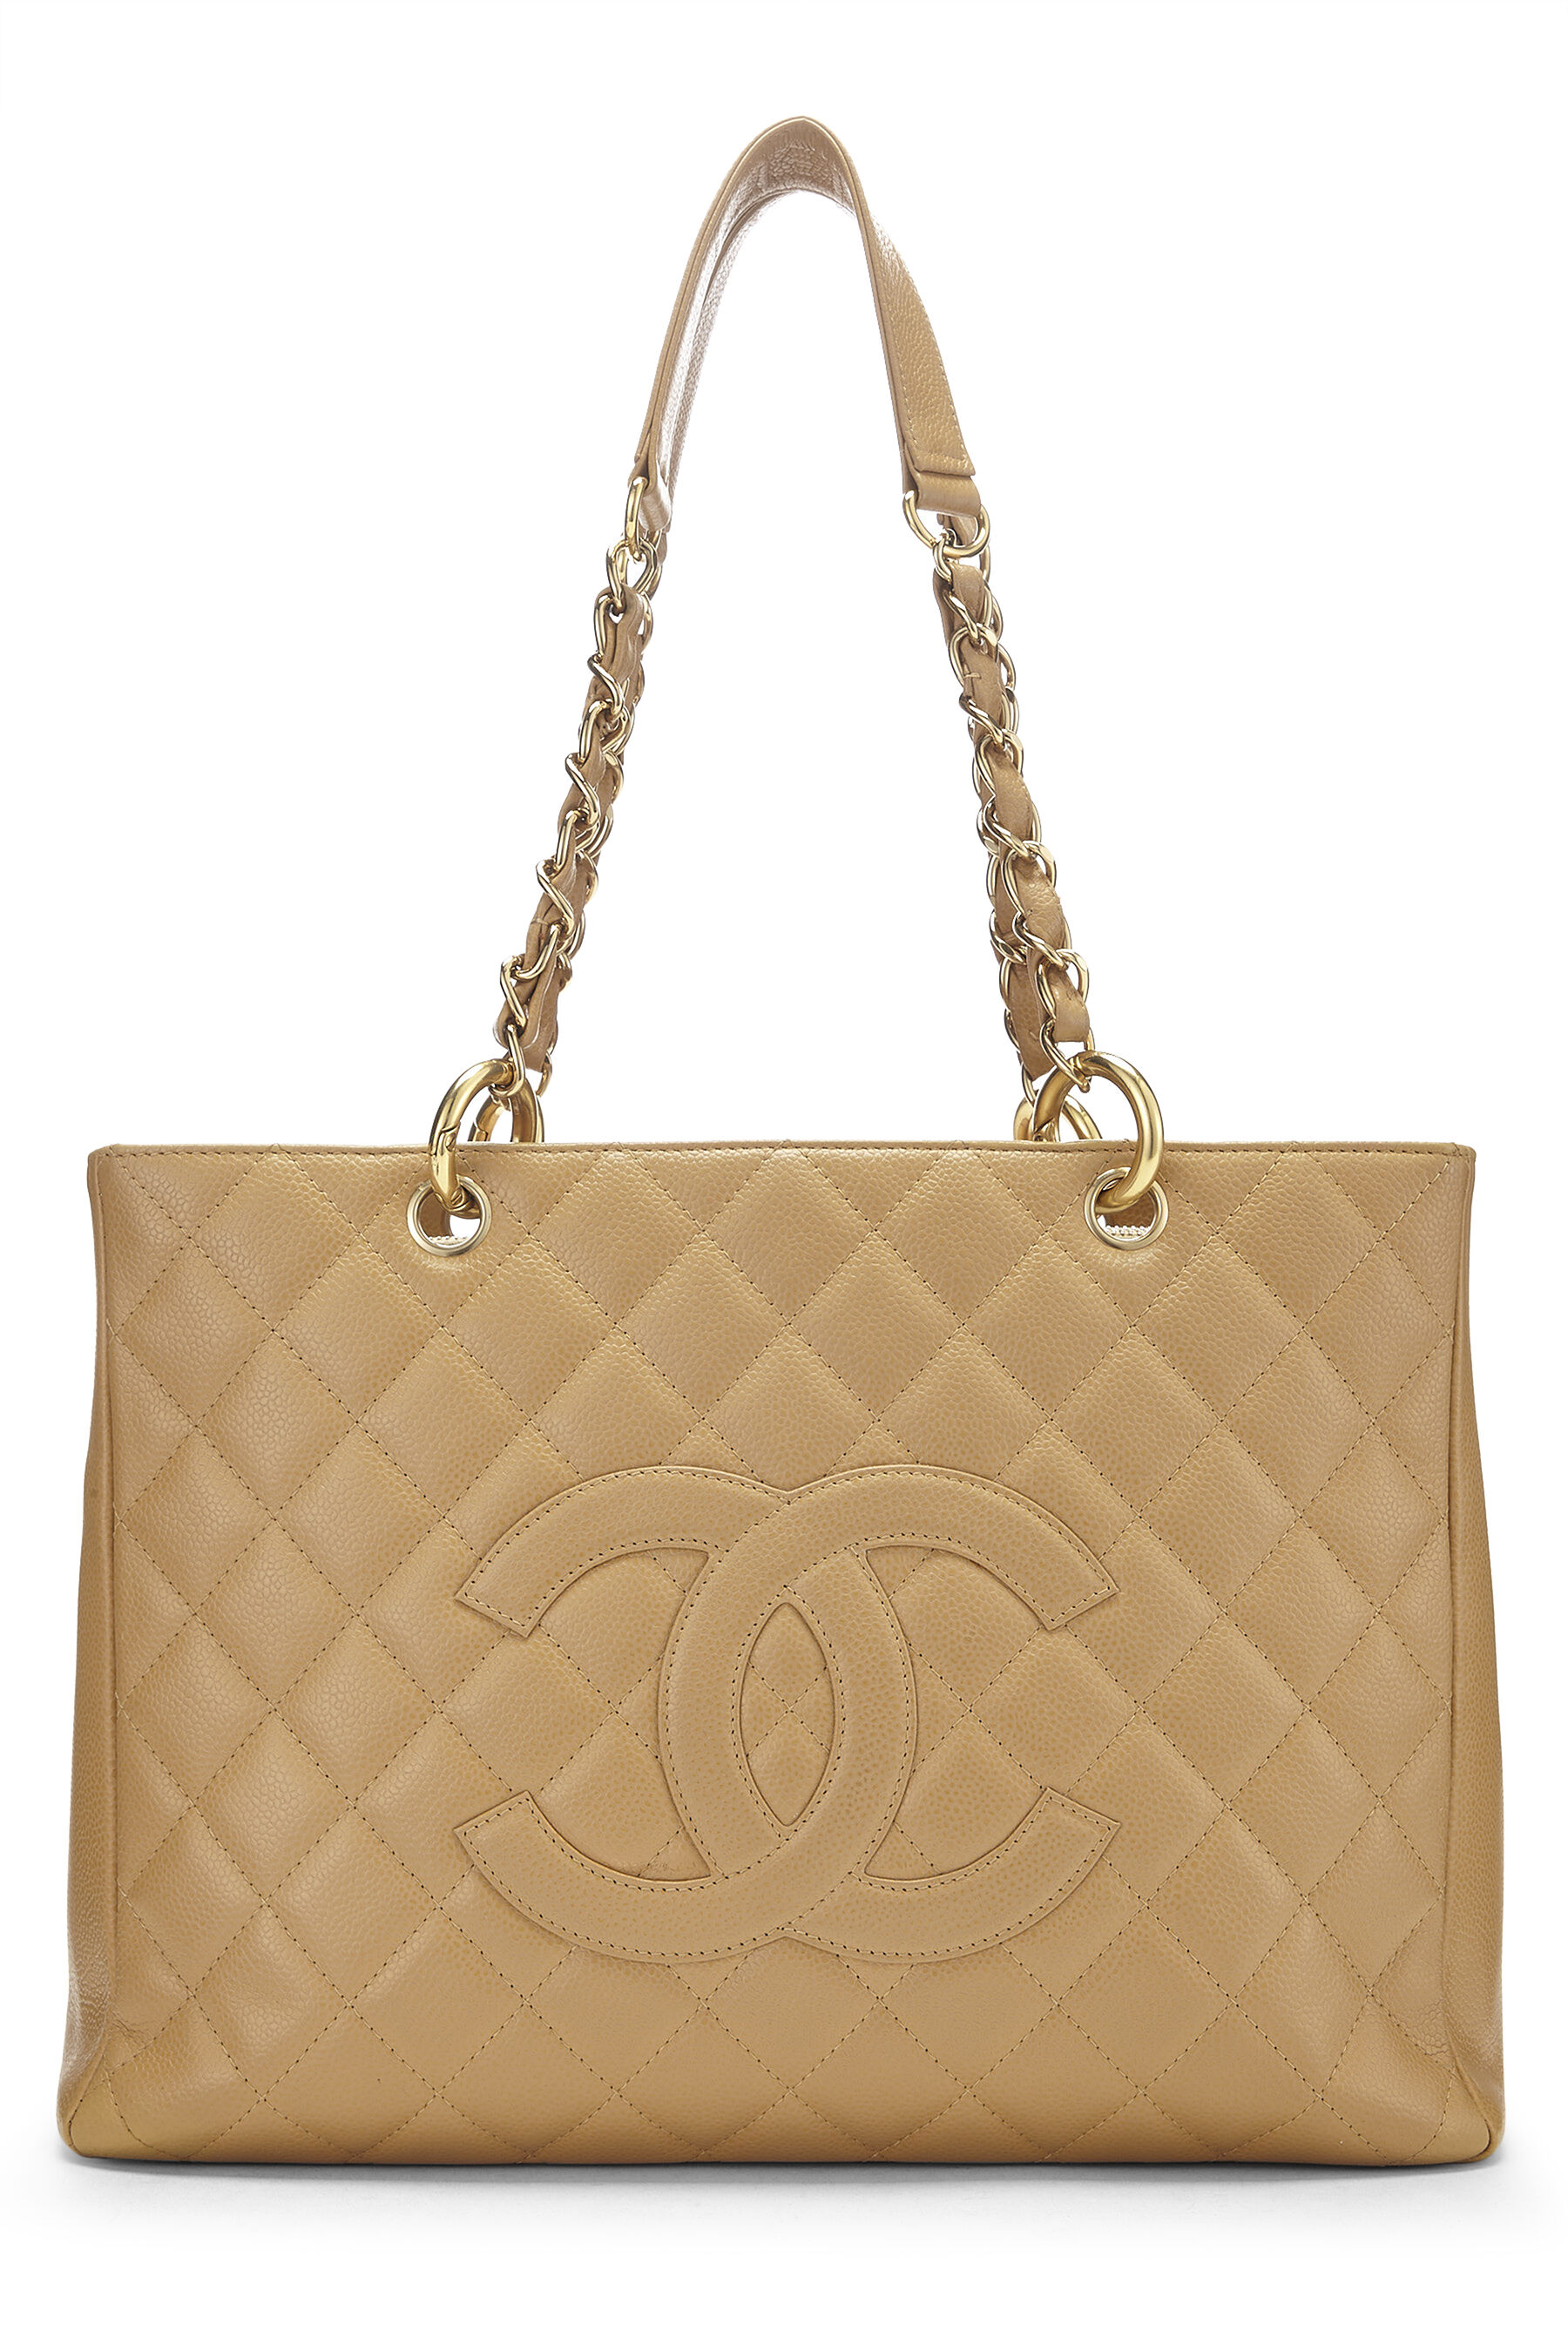 CHANEL Caviar Quilted Large Business Affinity Shopping Bag Beige 1205173